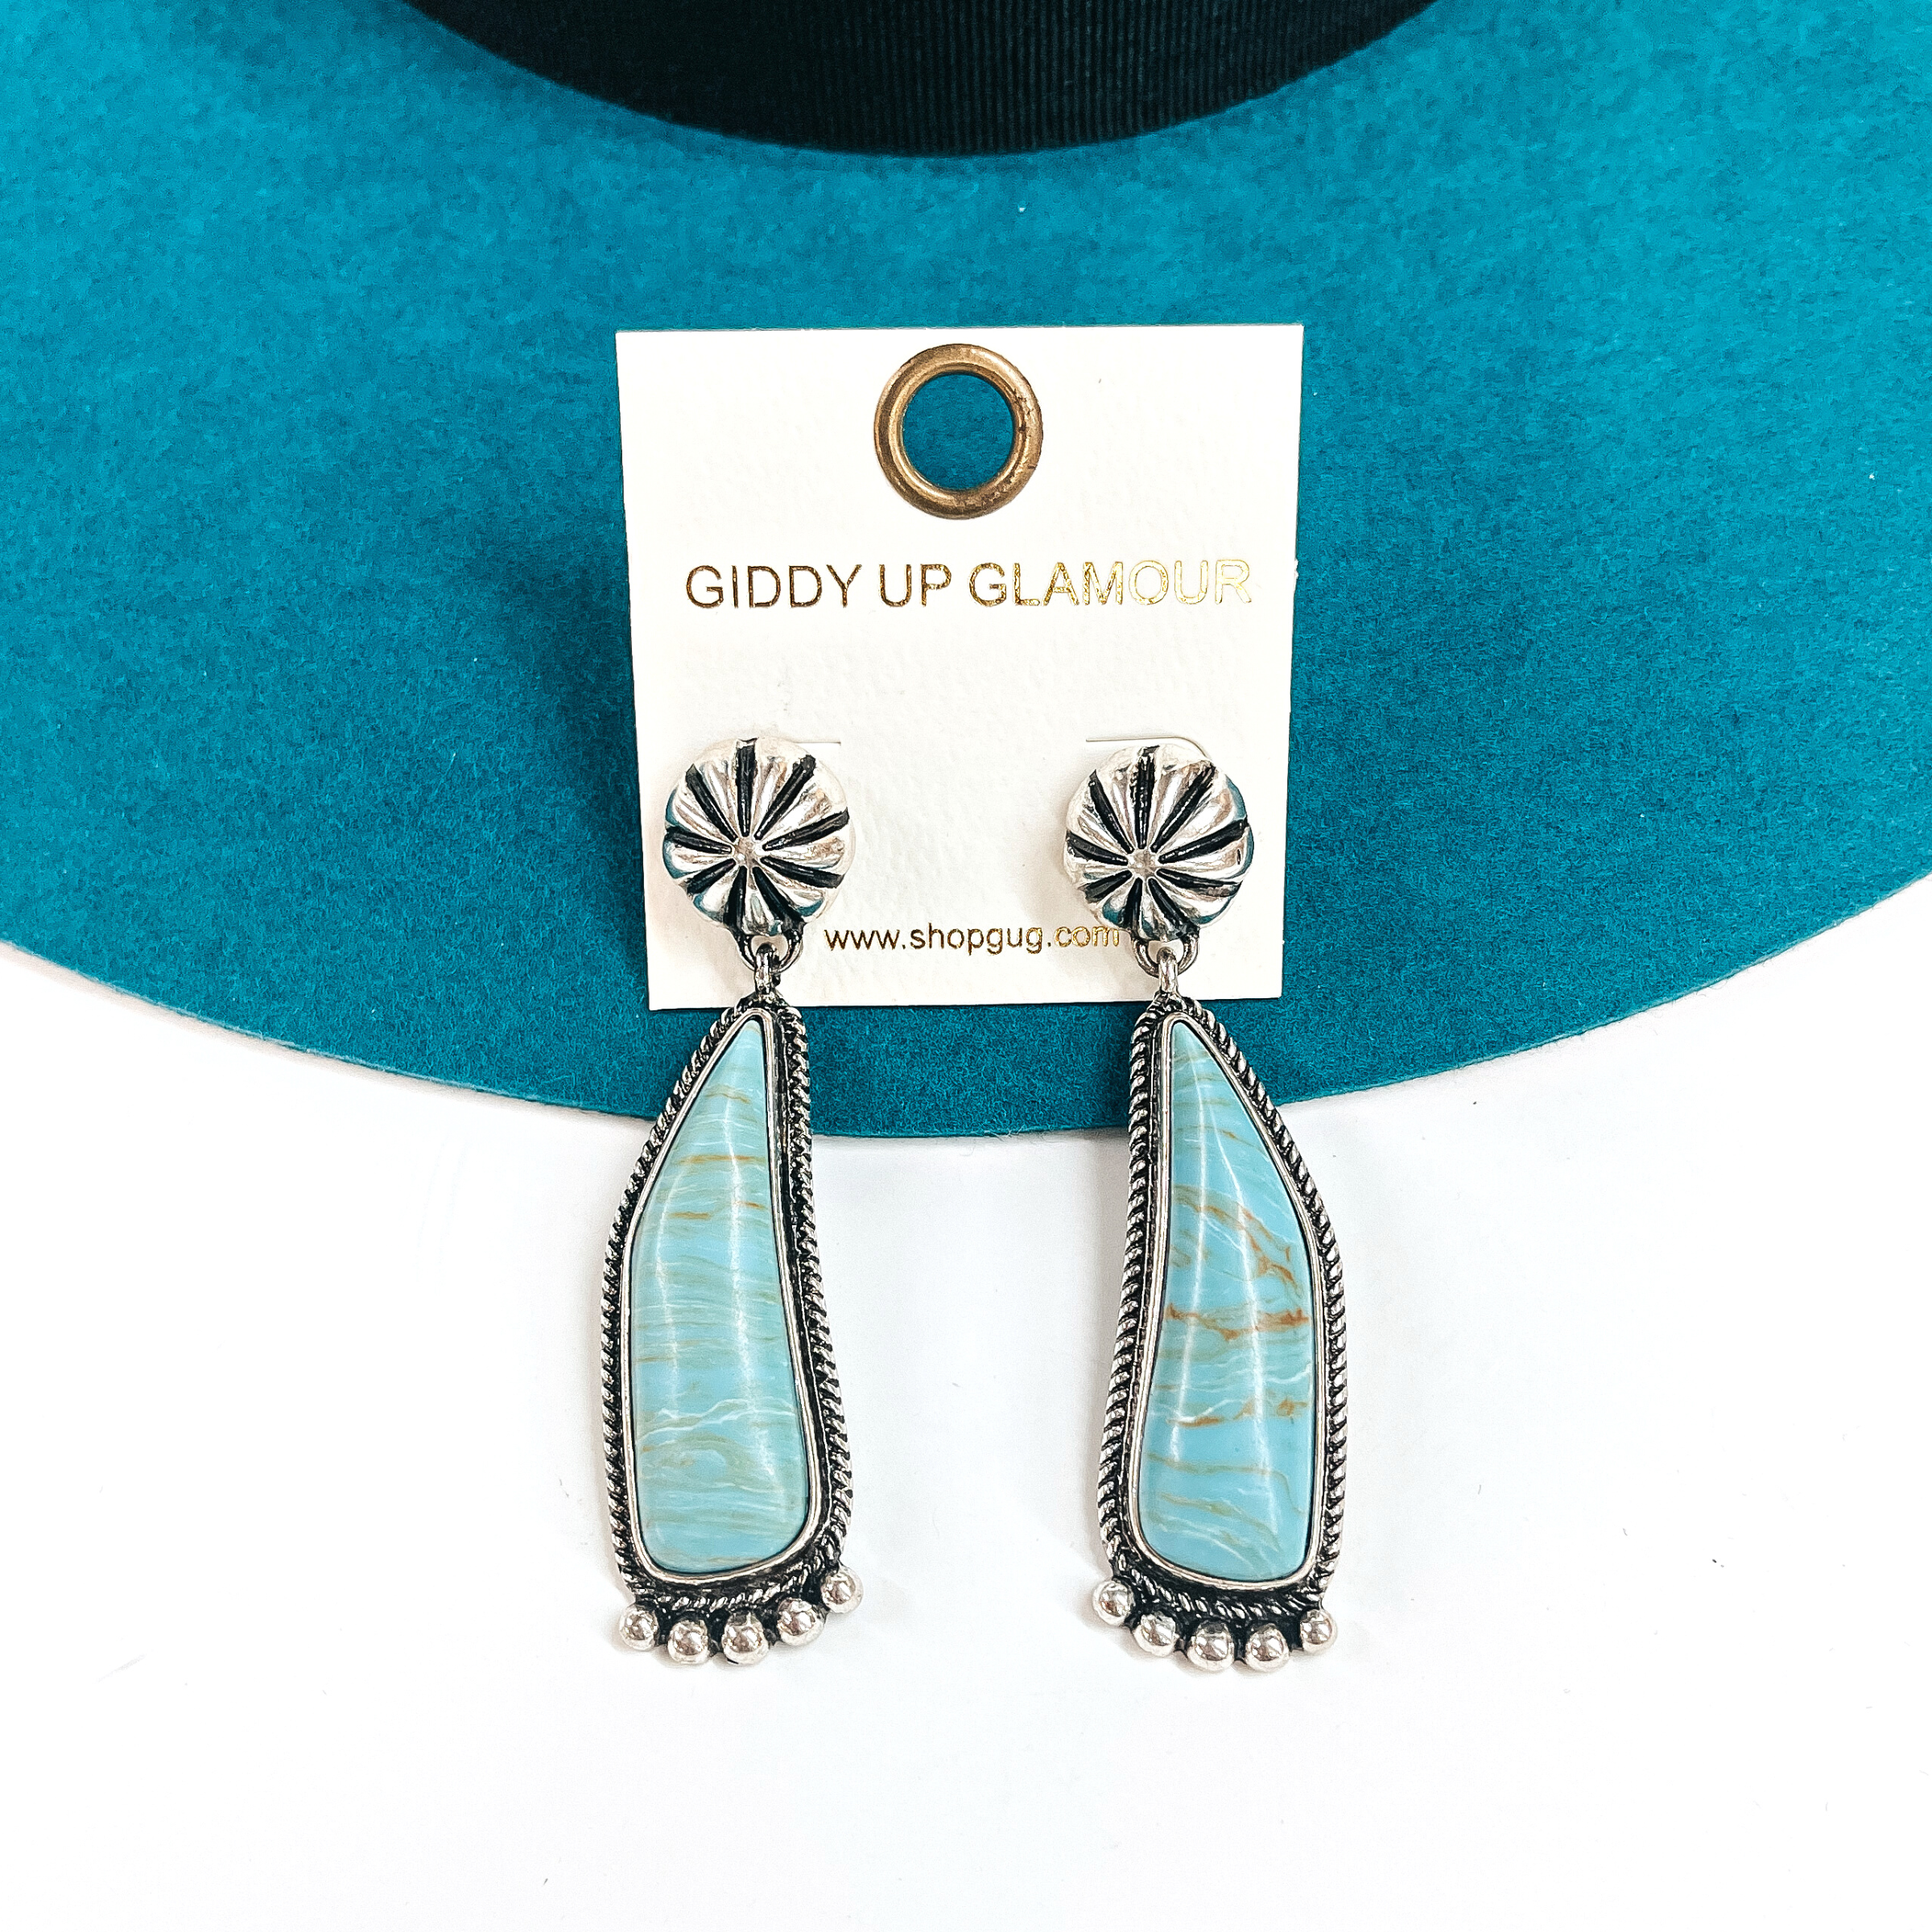 These are silver conch post earrings with a turquoise-marble stone drop earrings in a  silver setting. They have silver details in the bottom and they ae slightly curved.  These earrings are taken laying on a teal felt hat and on a white background.